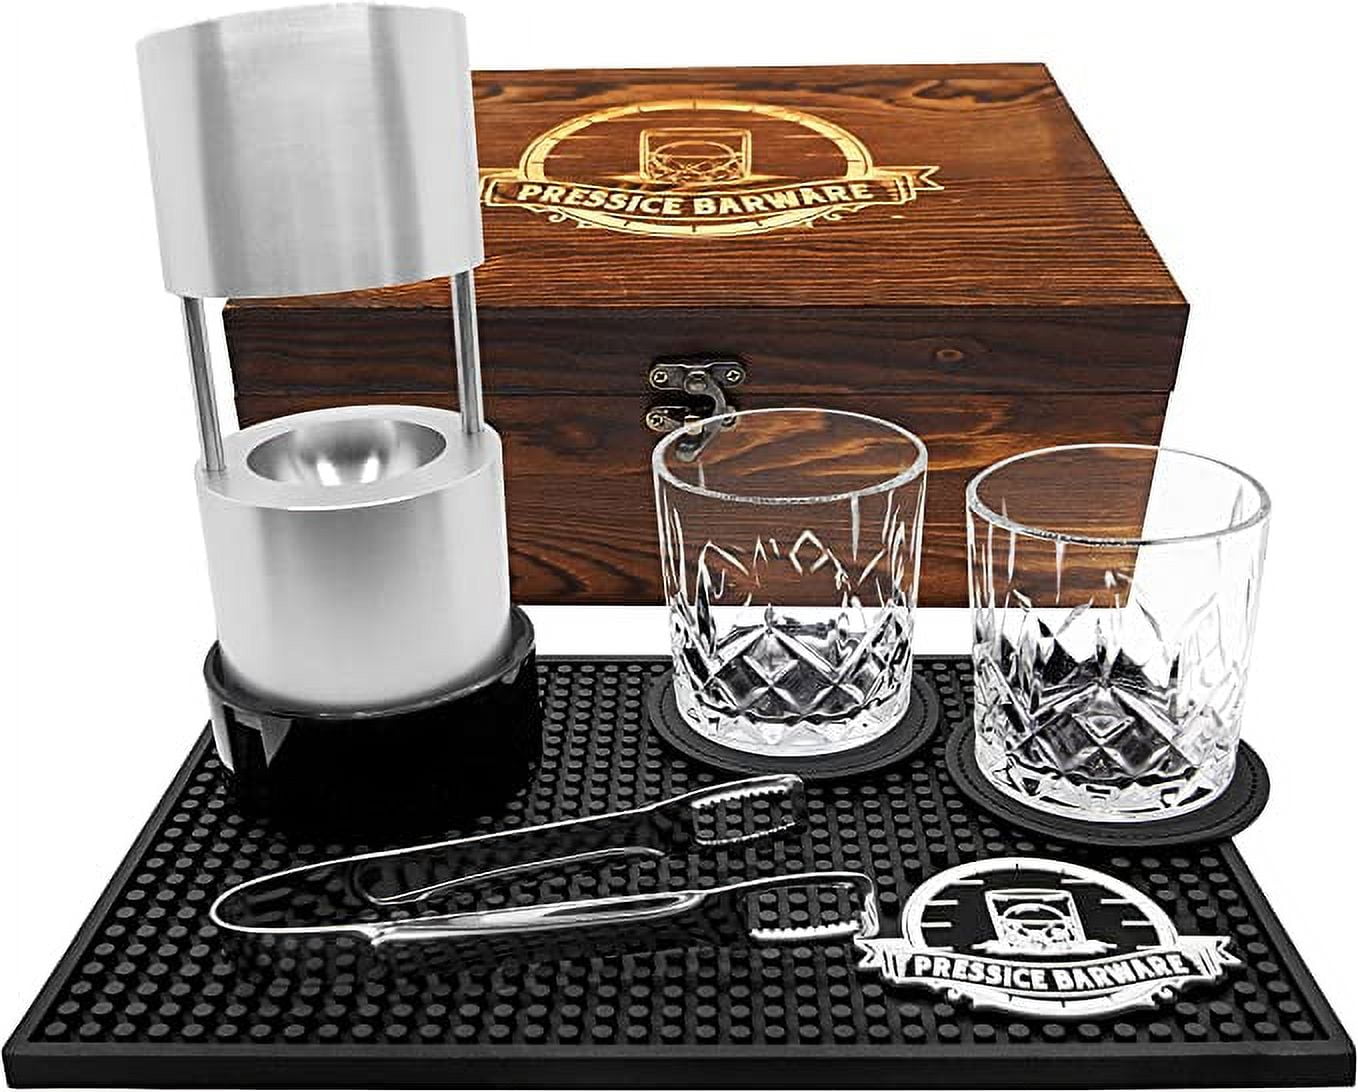 Whisky Glasses and Ice Ball Molds Set – Bar Supplies